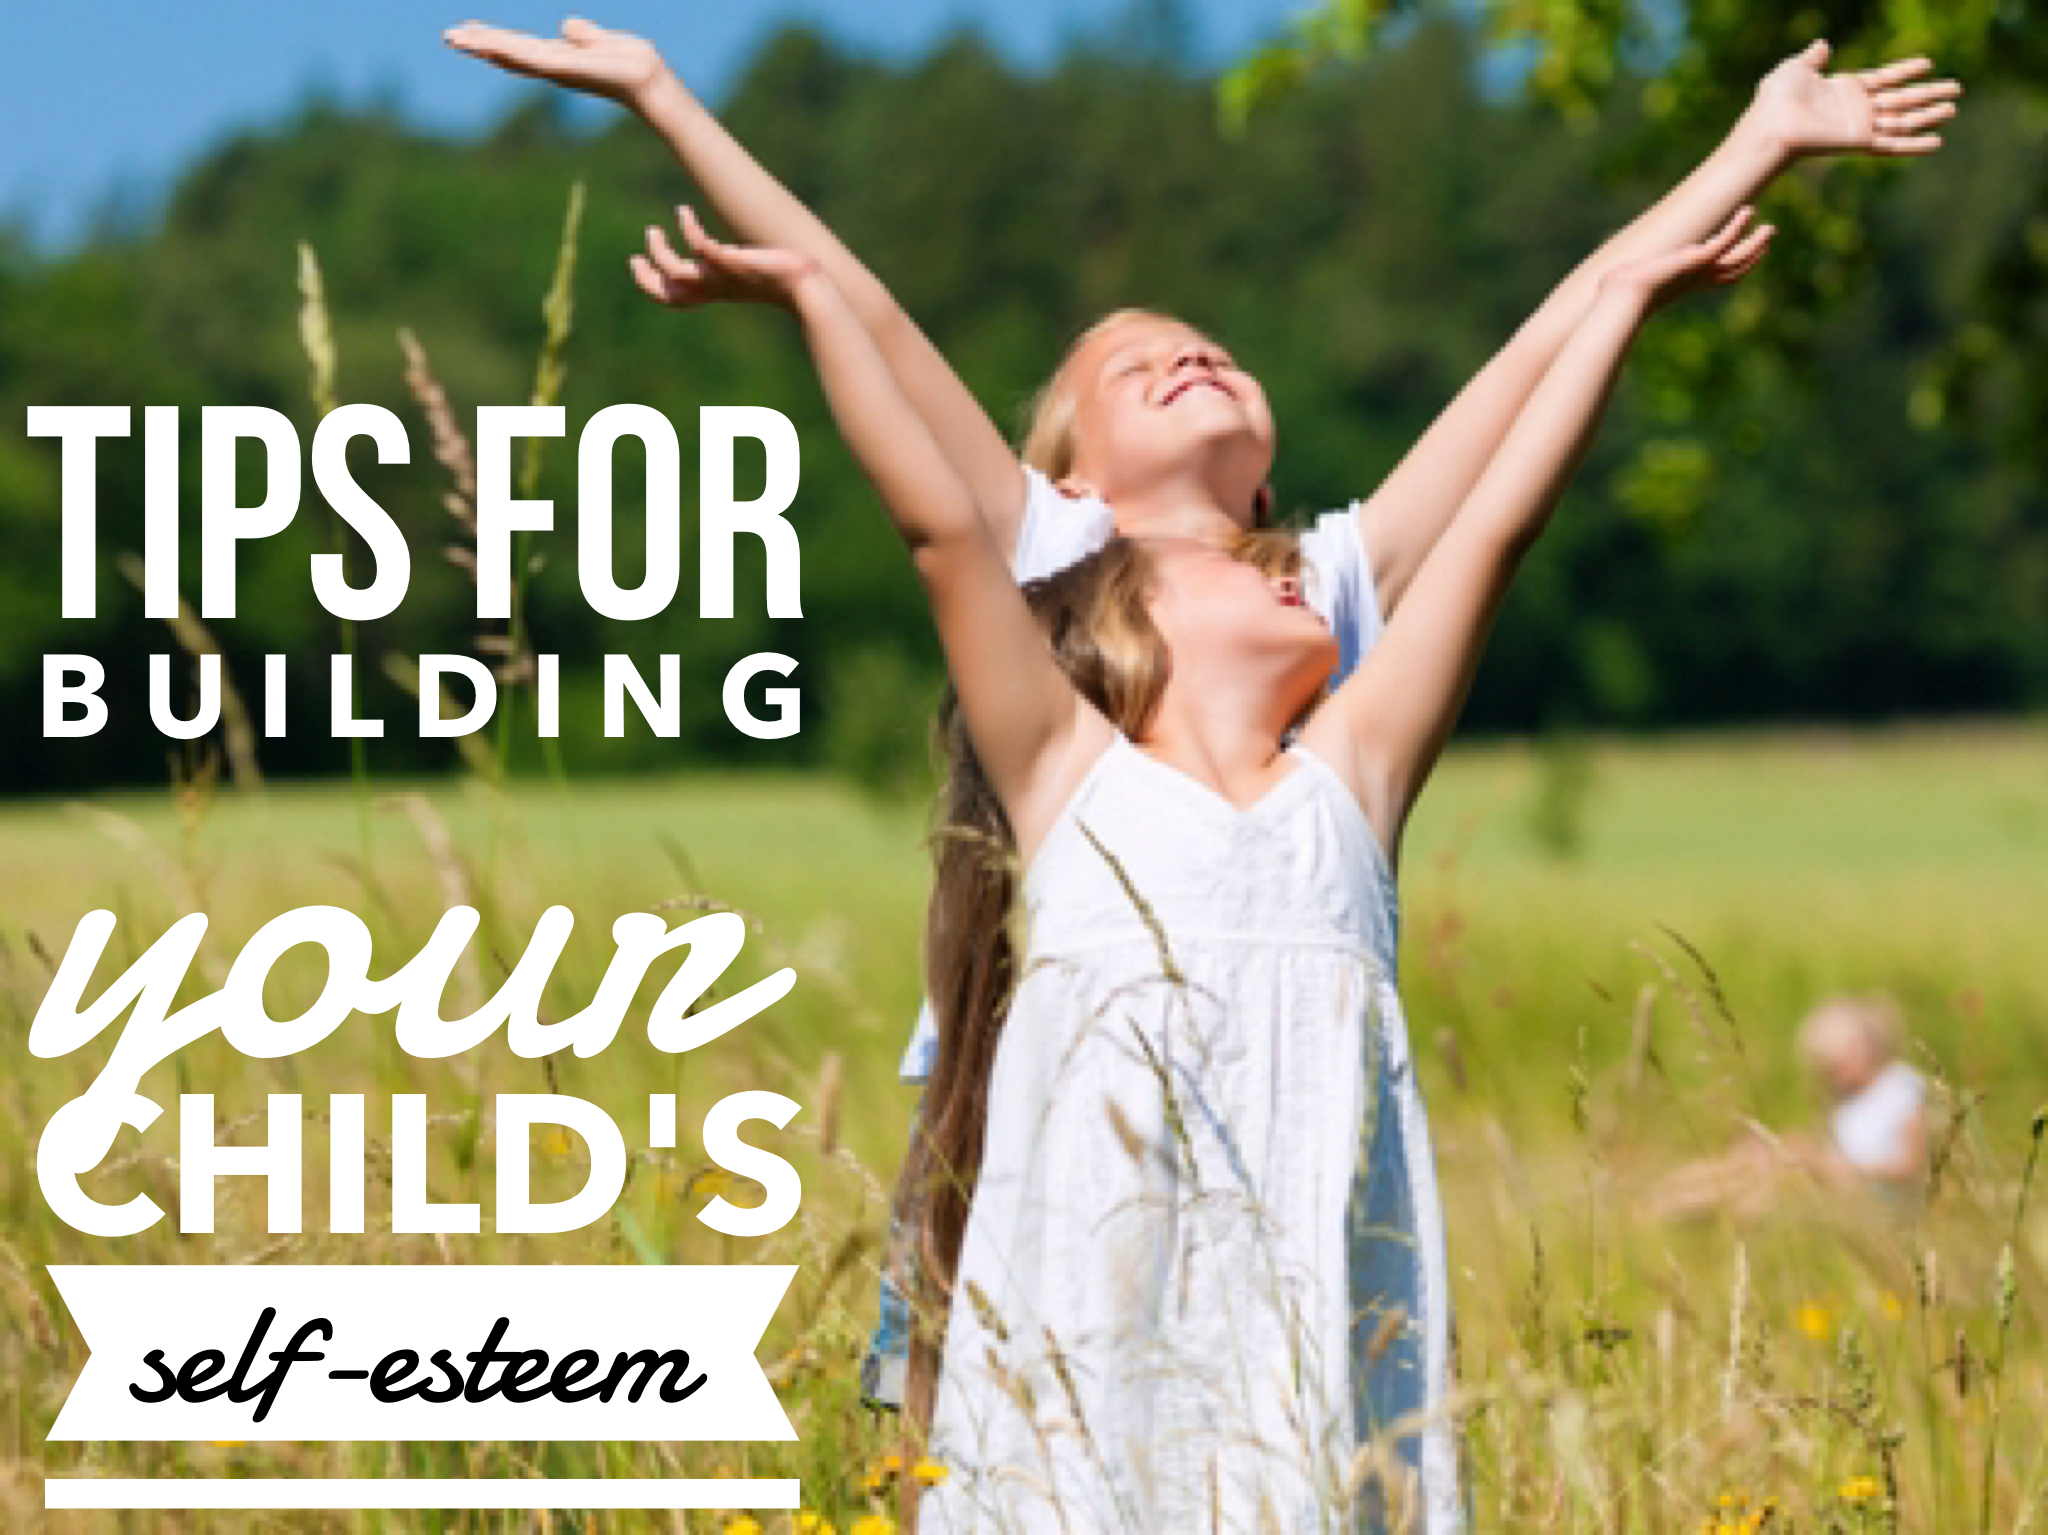 Tips for Building Your Child's Self-Esteem